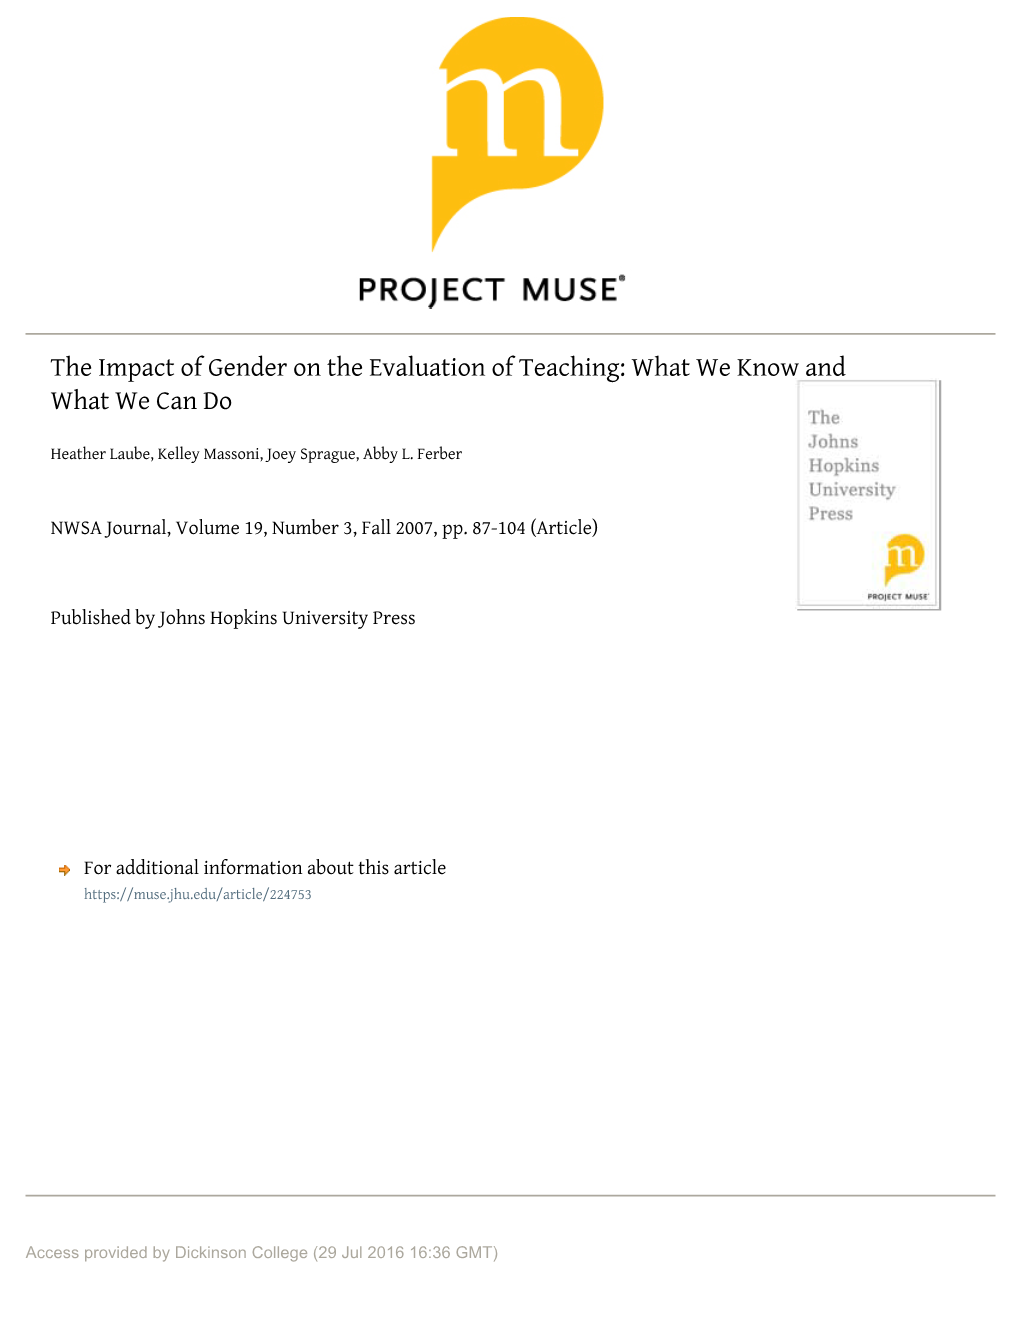 The Impact of Gender on the Evaluation of Teaching: What We Know and What We Can Do